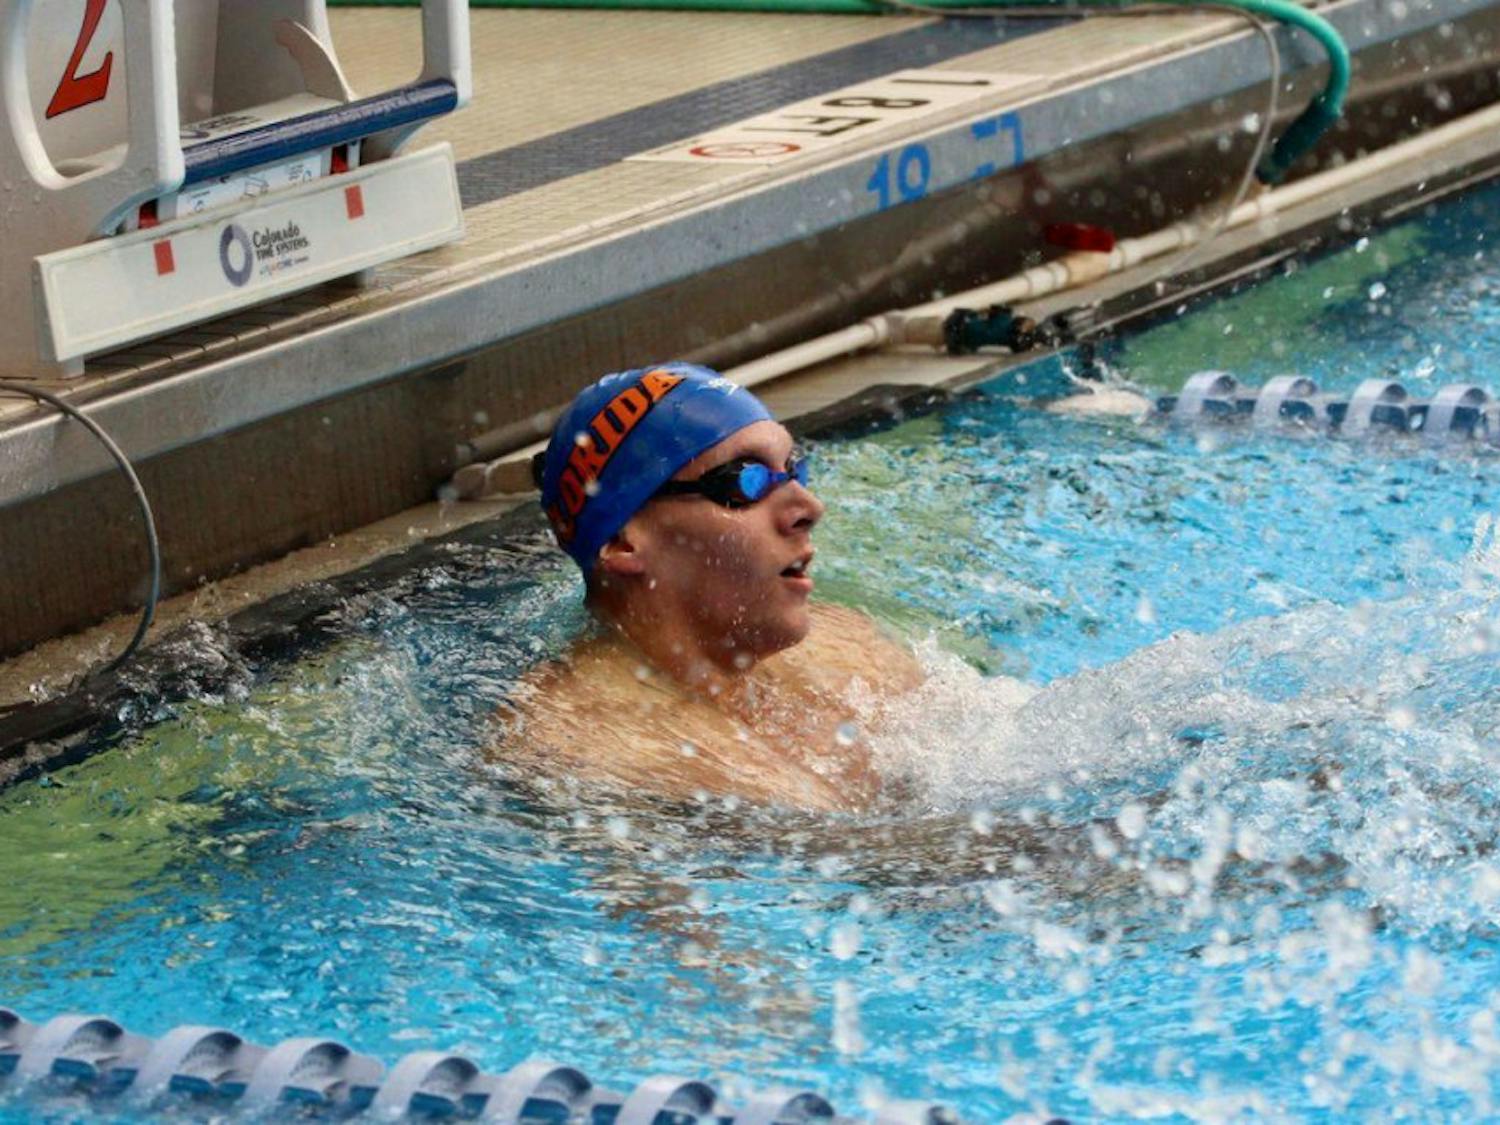 Former Gator Caeleb Dressel set a FINA World Championships record with eight medals (including six gold) last week. He also set a world record time of 49.50 seconds in the 100-meter butterfly.